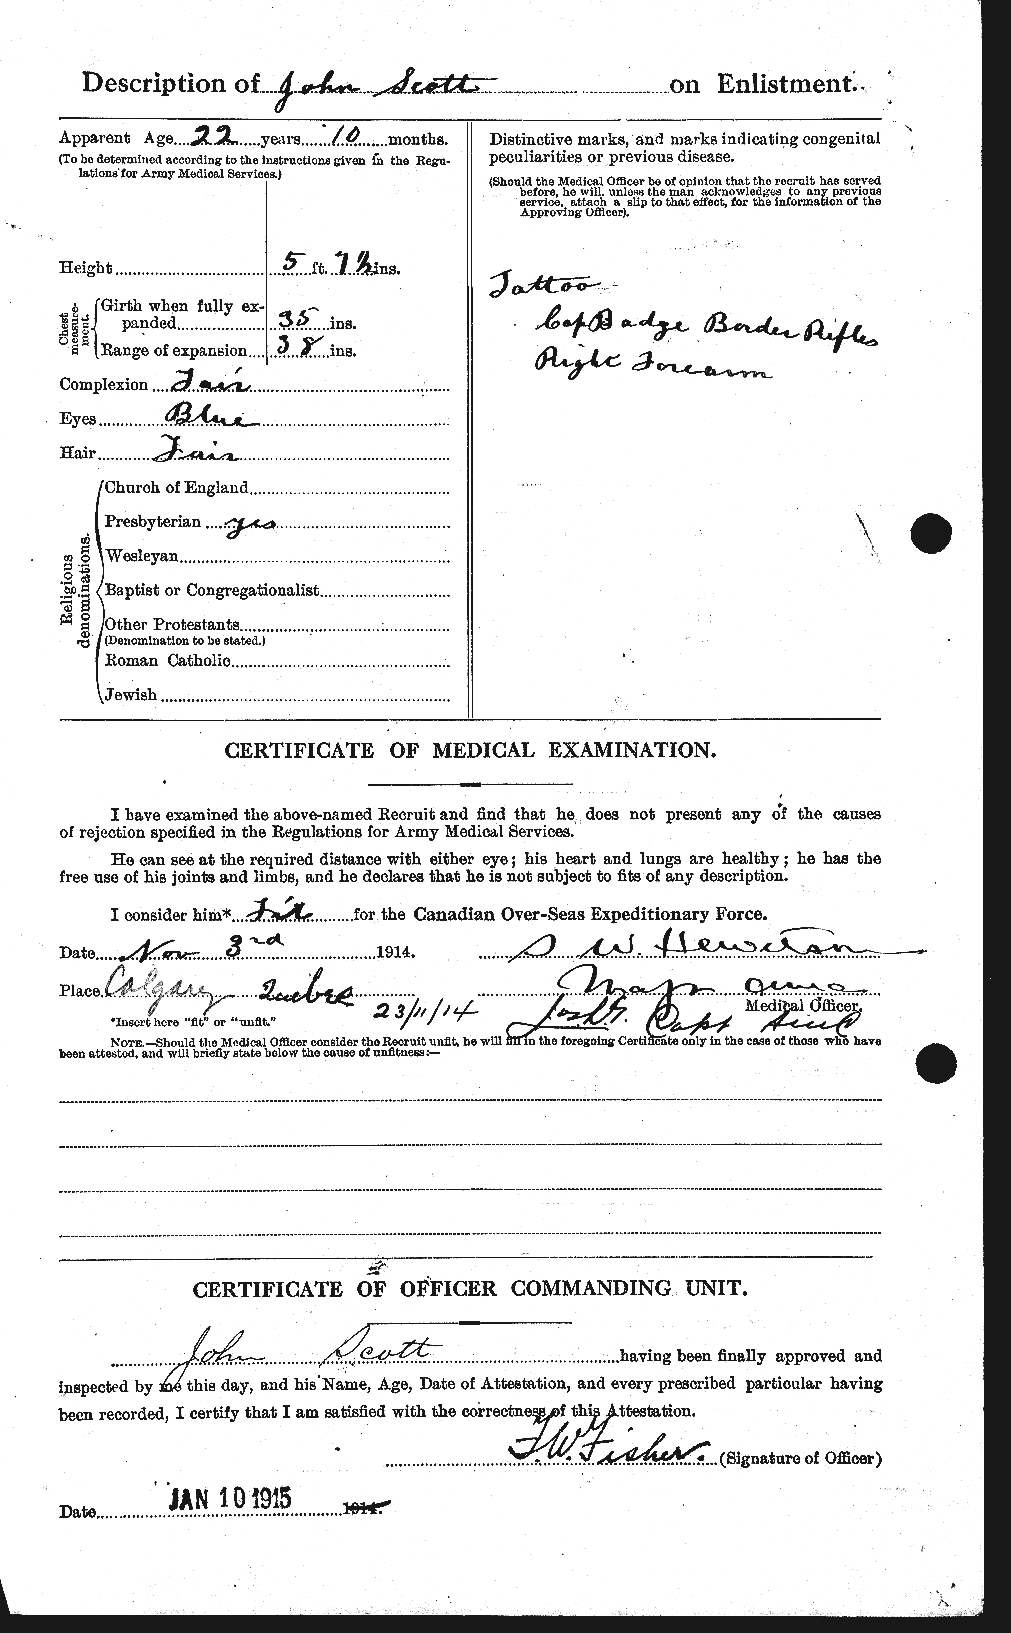 Personnel Records of the First World War - CEF 084897b